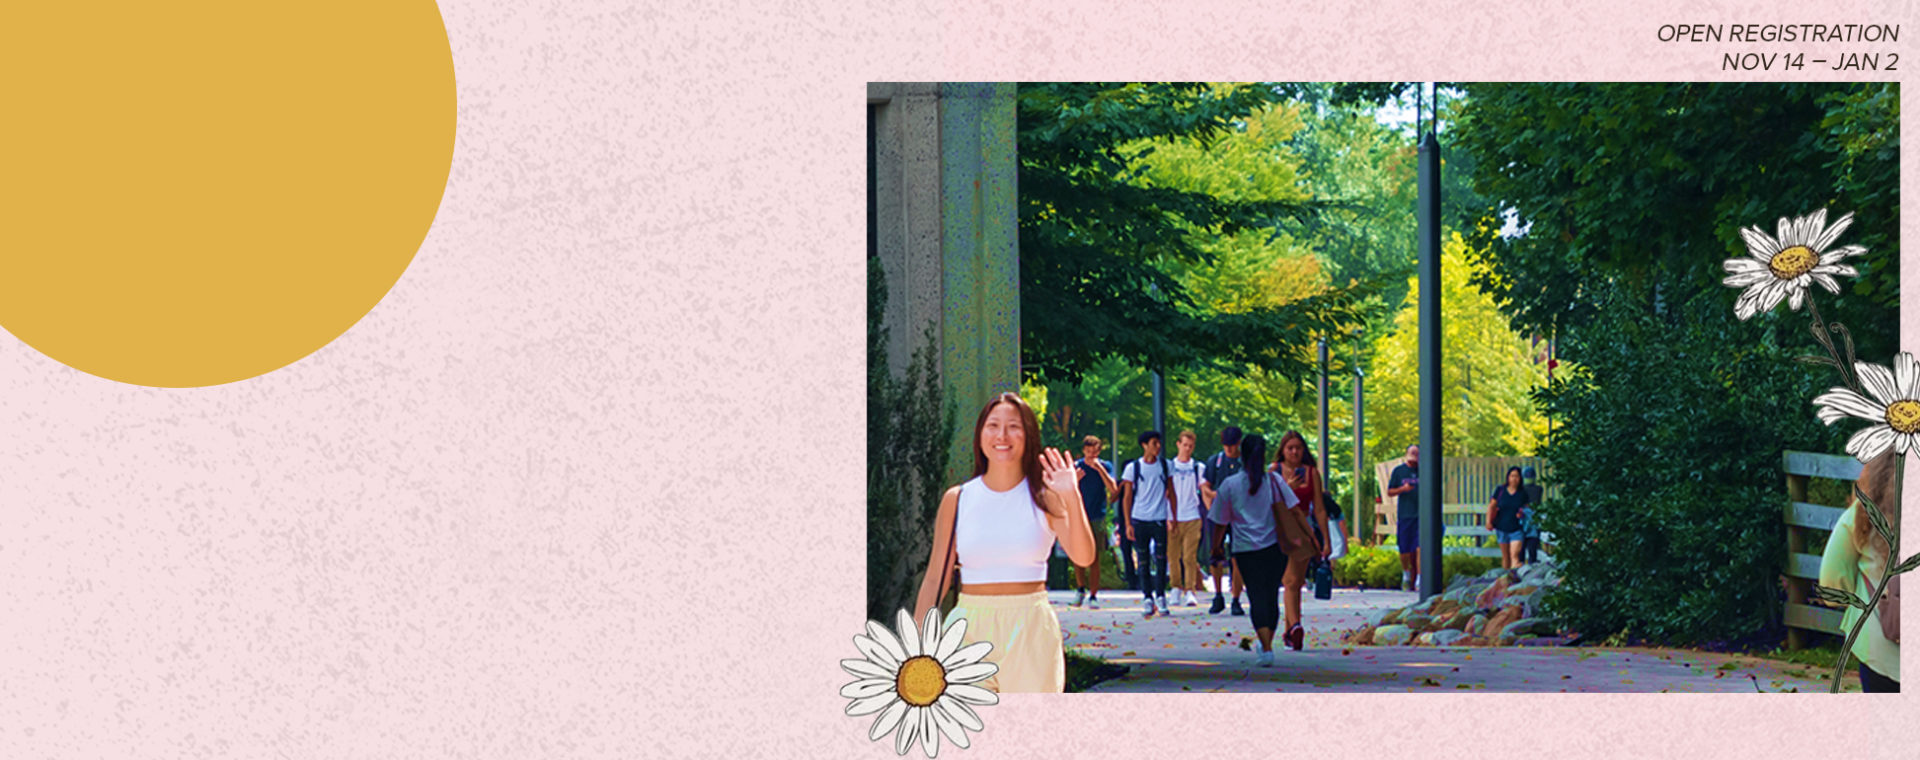 Pink background with spots of yellow and daisies on top of a photo of students walking on path to class.